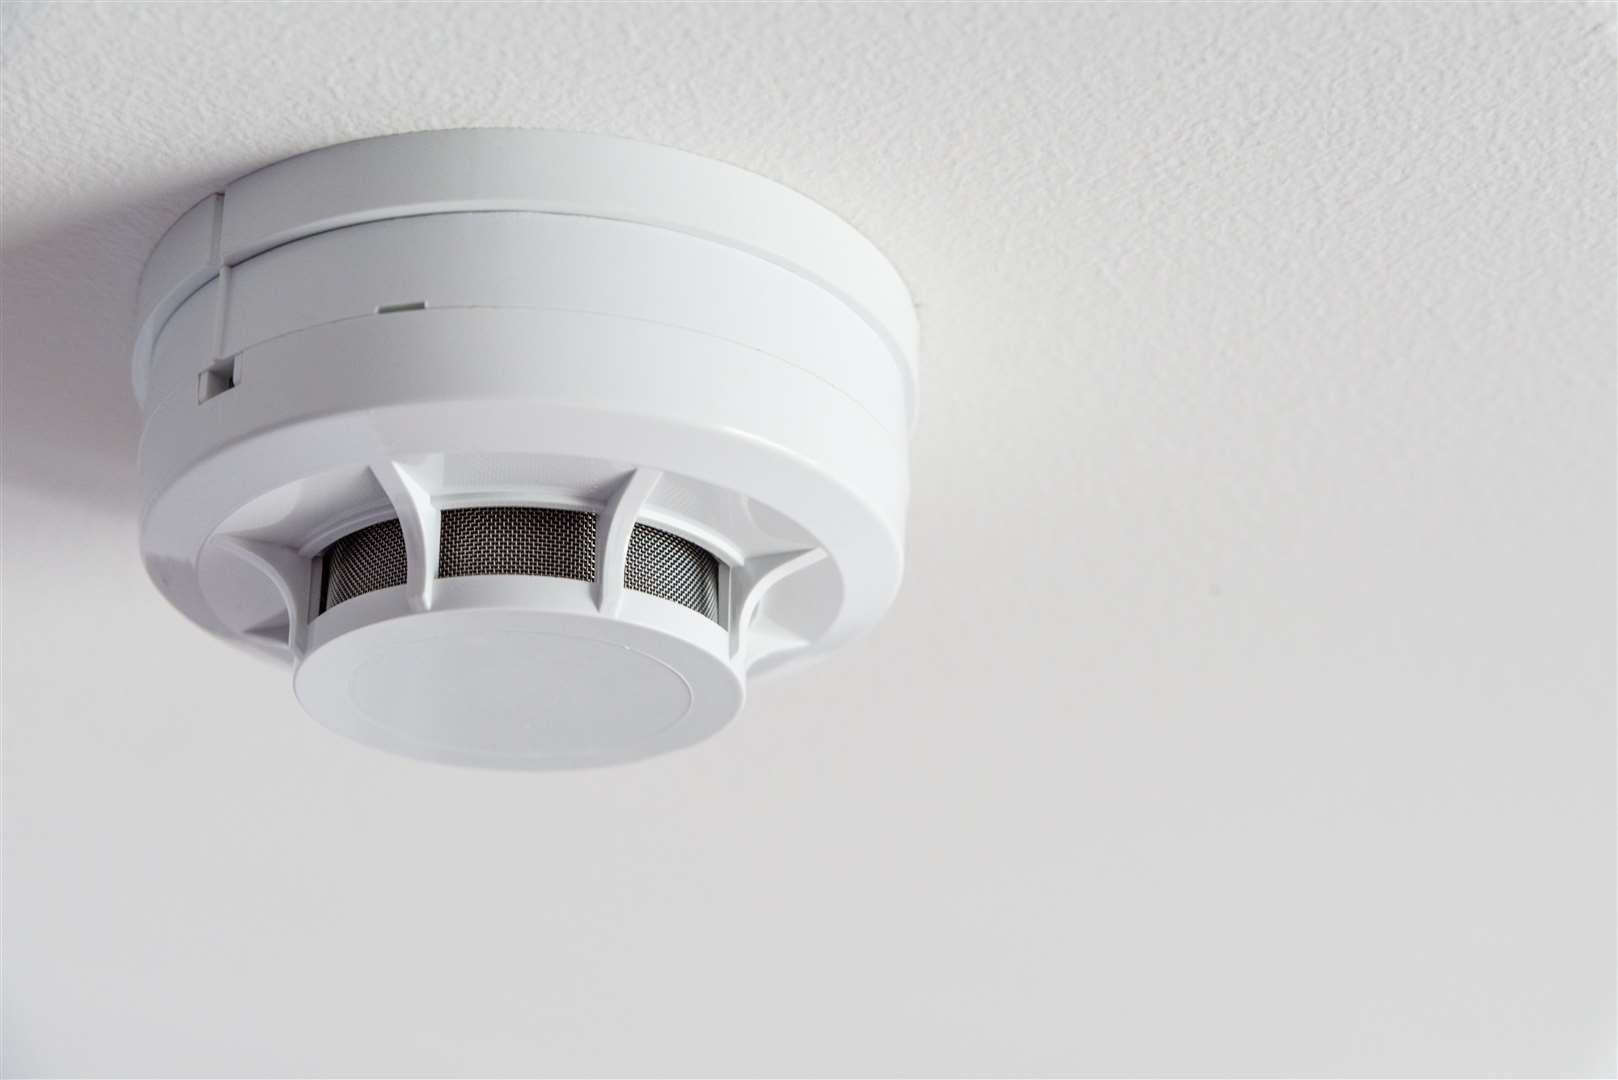 Smoke detector on a ceiling.